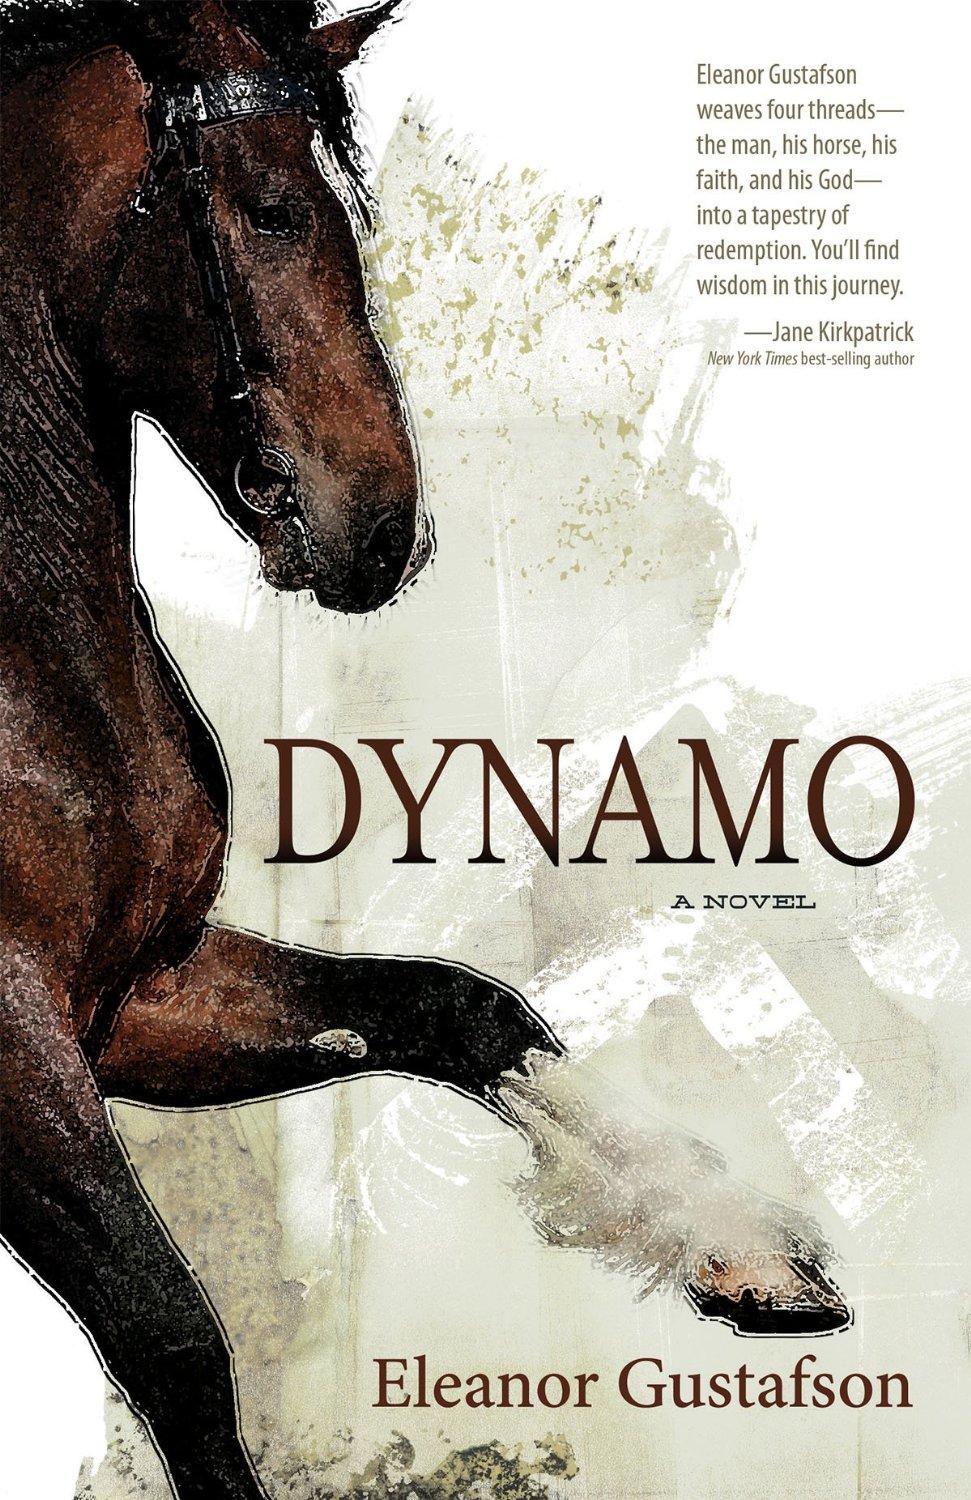 You are currently viewing Video of the Week: Dynamo by Eleanor Gustafson